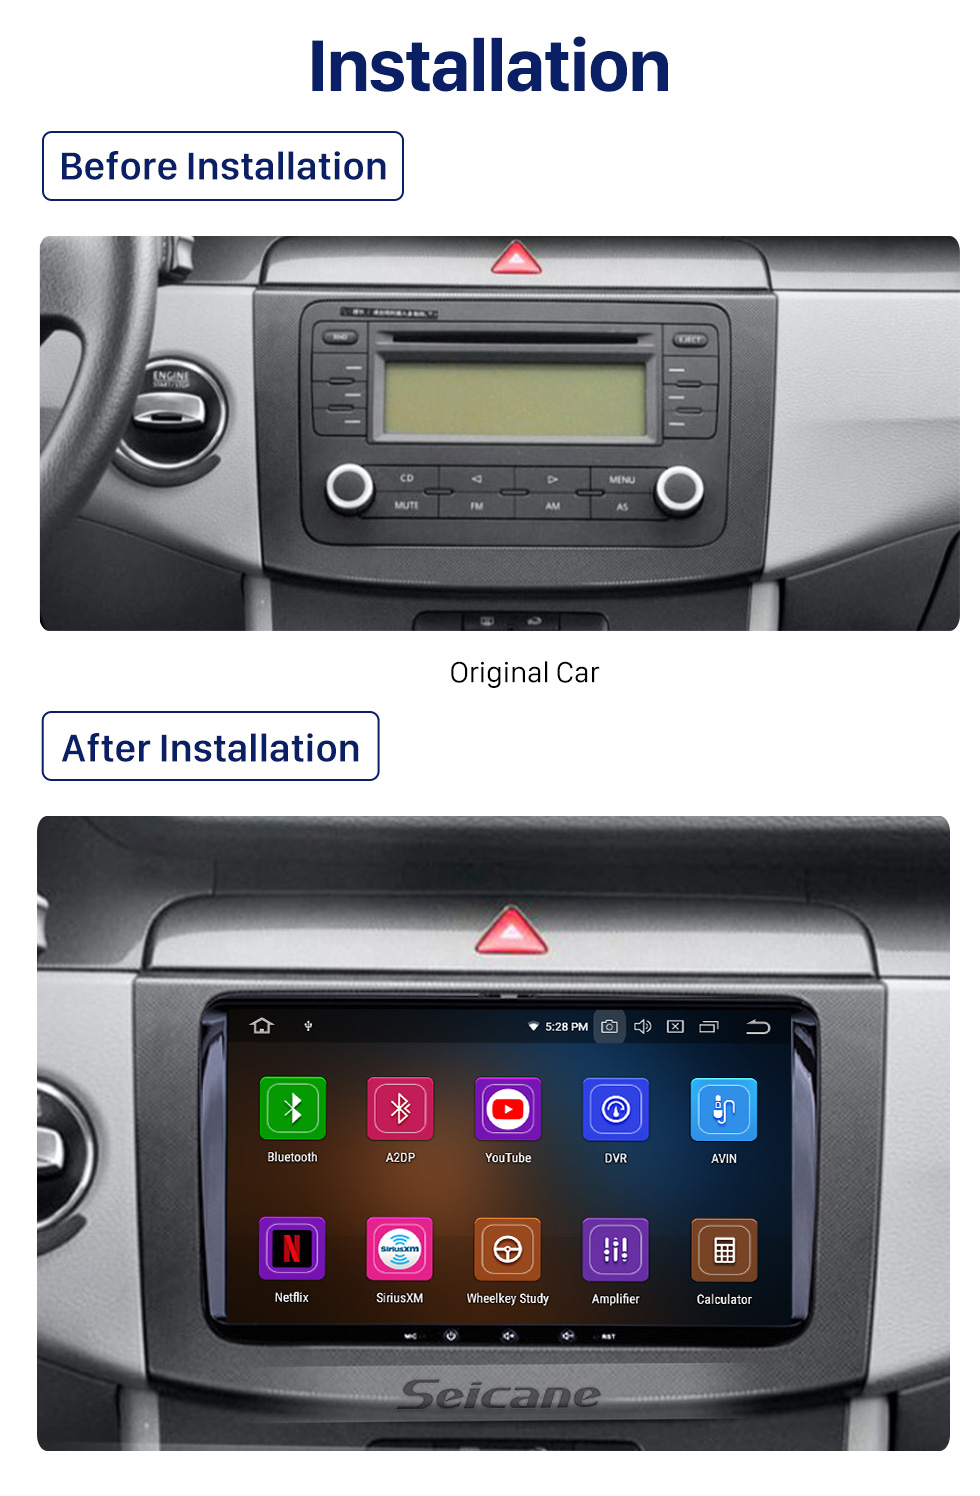 Seicane OEM Android 10.0 GPS Radio Audio System for VW Volkswagen Universal SKODA Seat Support DVD Player 3G WiFi Mirror Link OBD2 DVR Bluetooth Rearview Camera touch Screen 